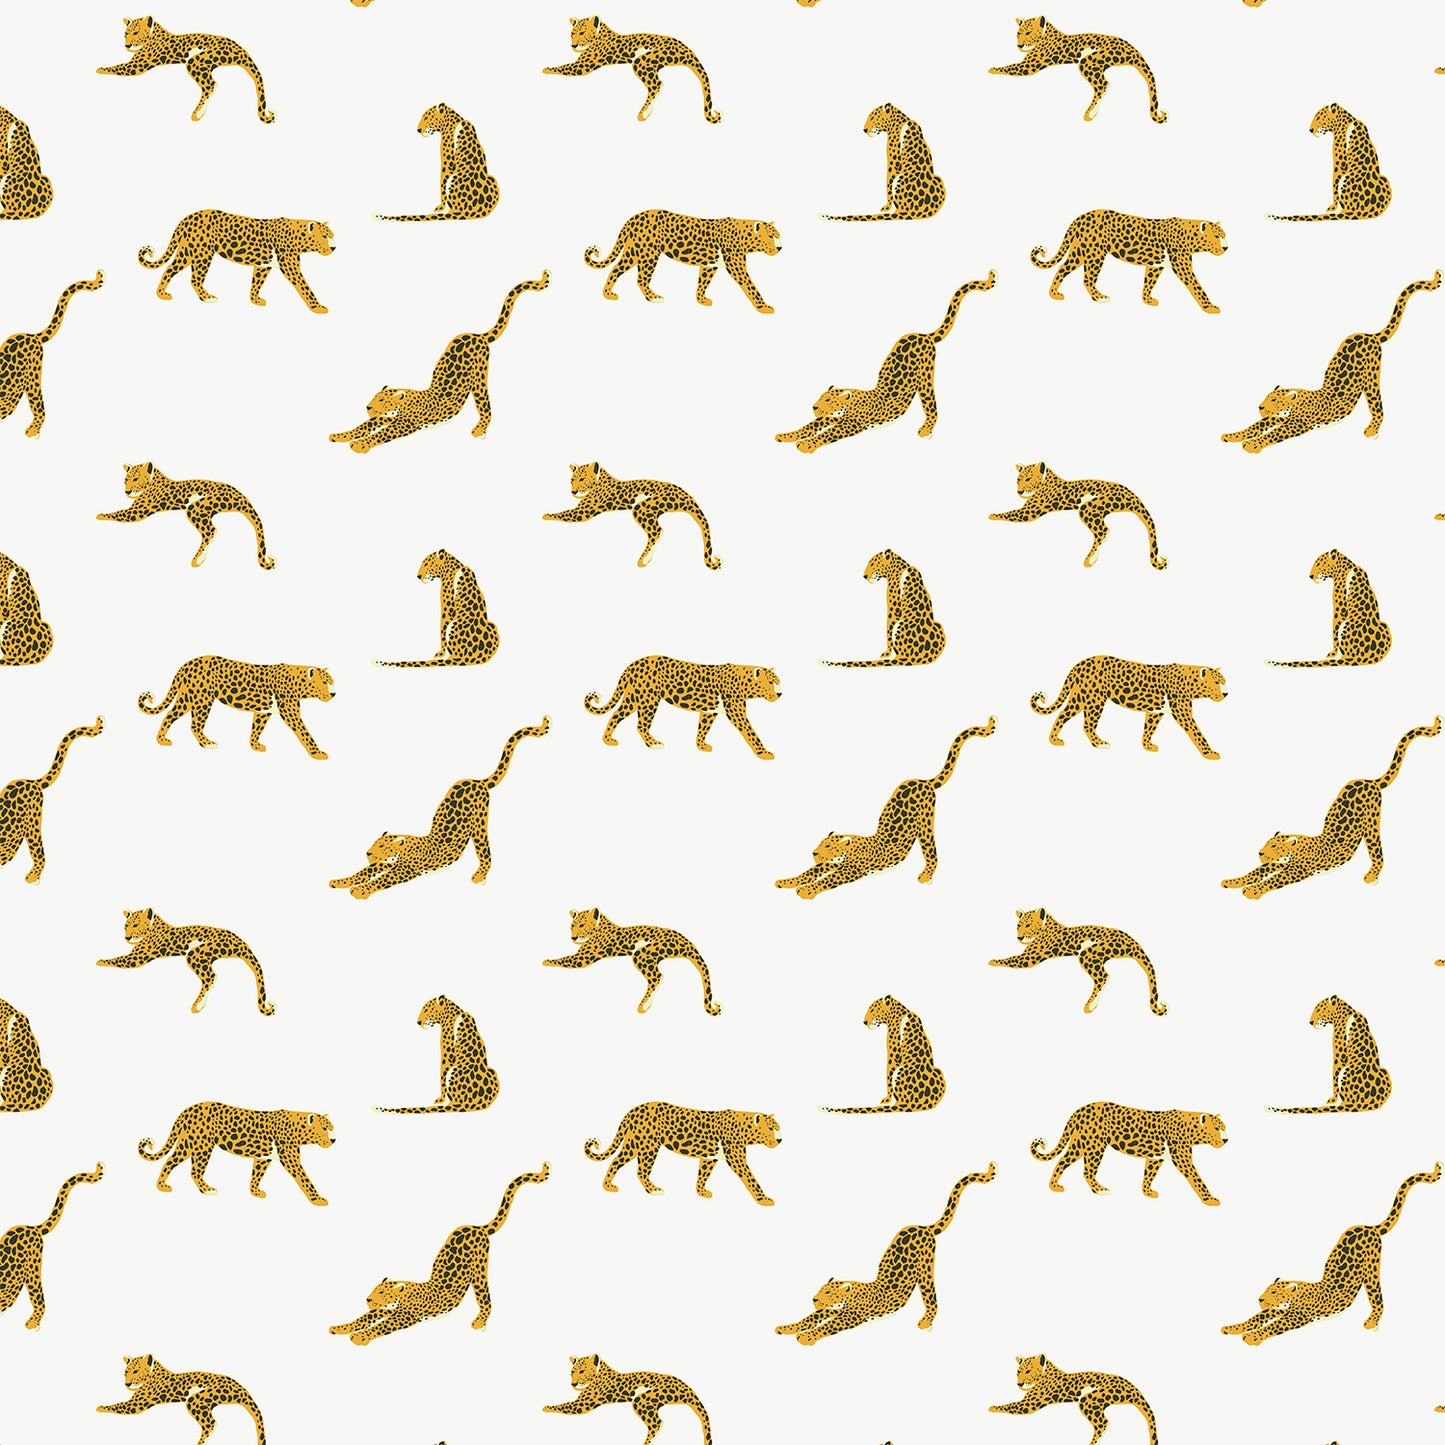 Leopard Flat Wrapping Paper Sheet Wholesale Wraphaholic